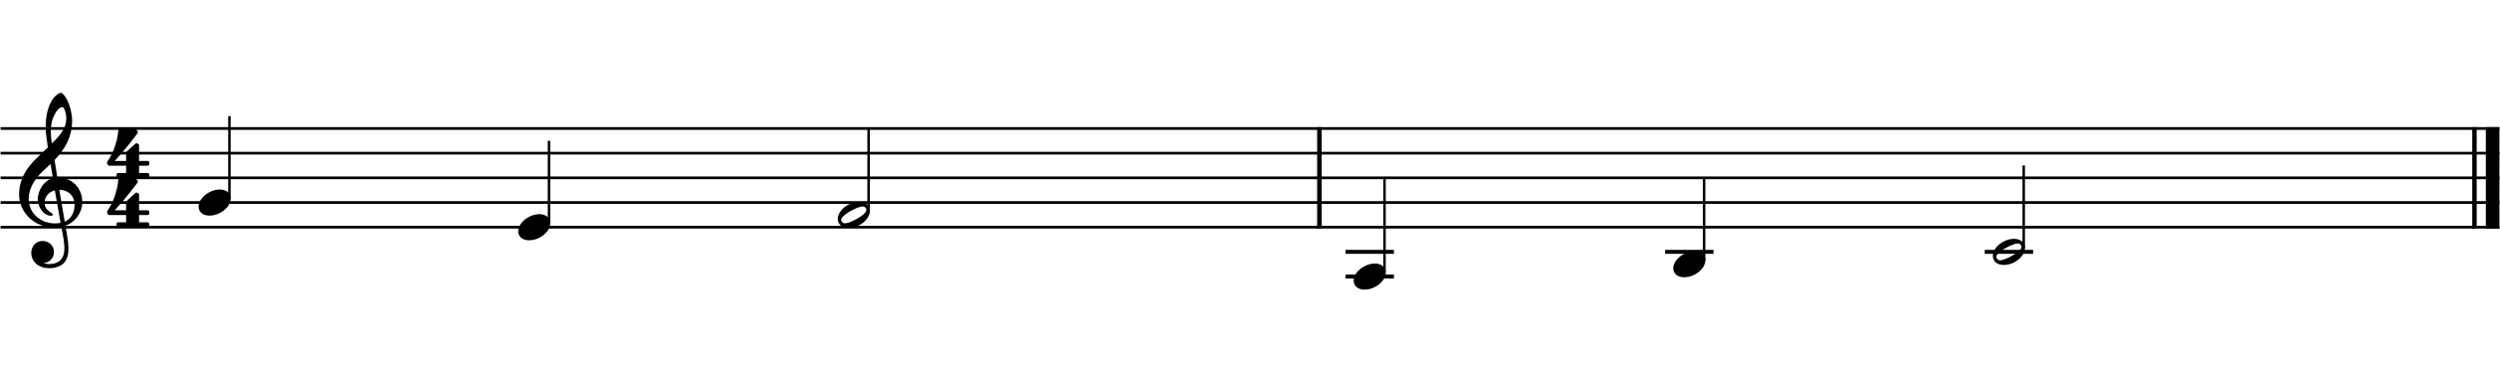 How to harmonize a melody. Single line of melody in standard notation.